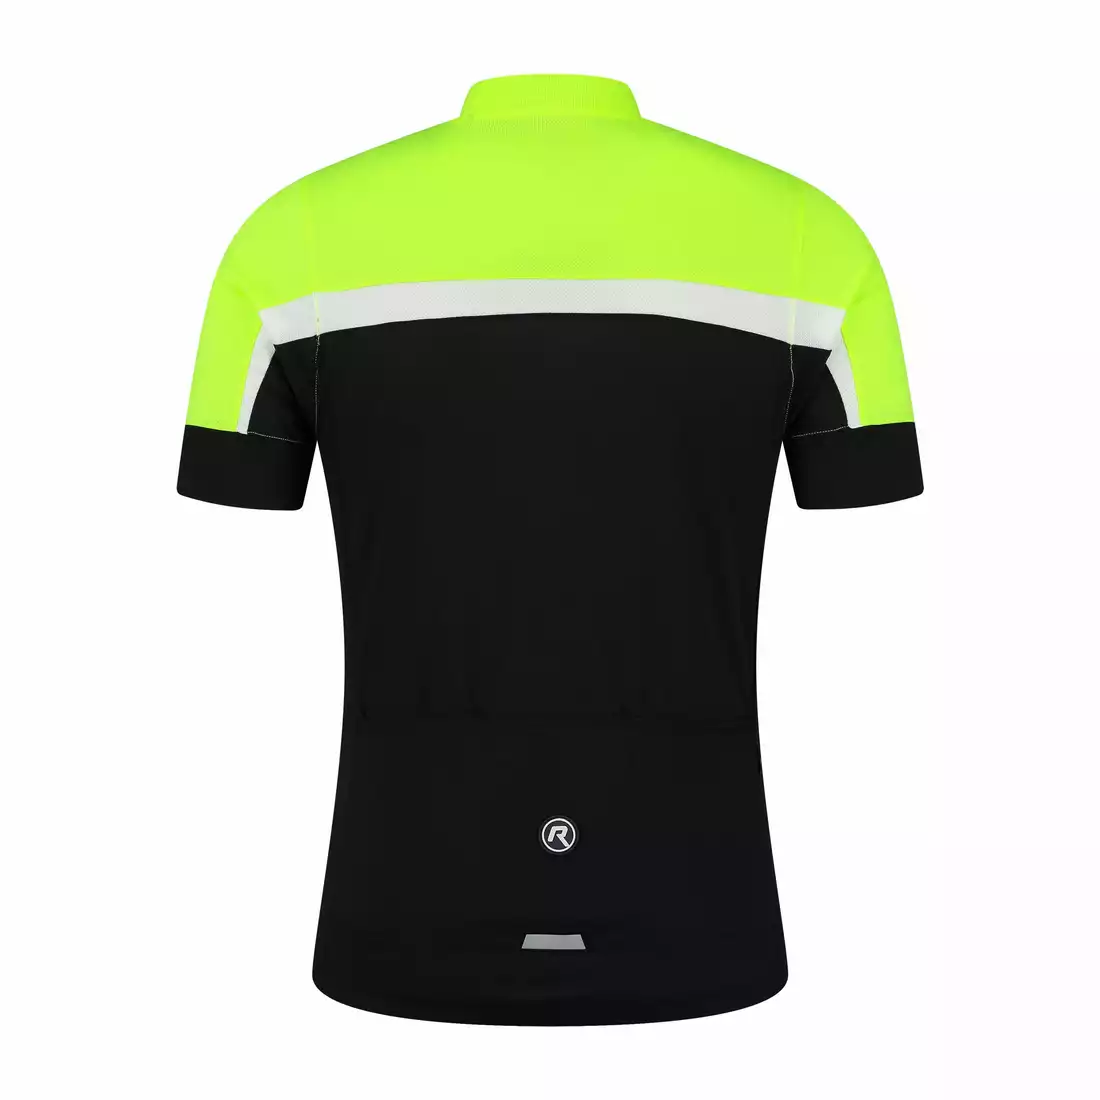 ROGELLI COURSE children's cycling jersey, black and yellow